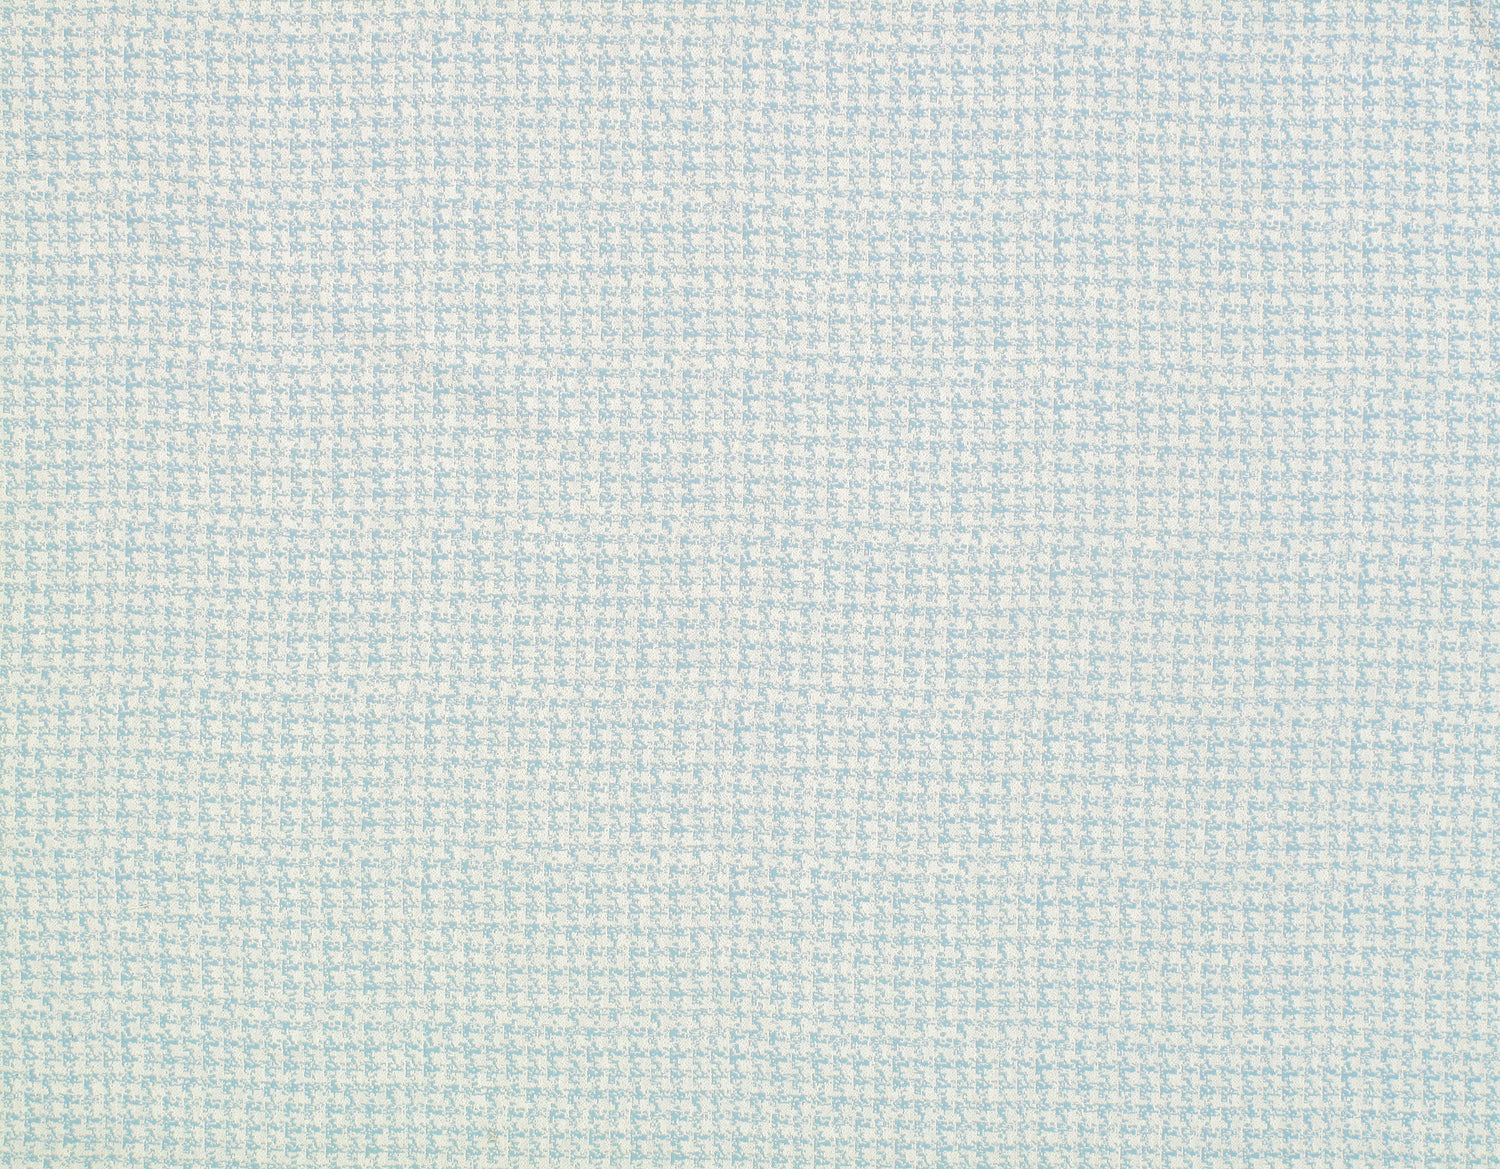 Downton fabric in aqua color - pattern number TL 00041393 - by Scalamandre in the Old World Weavers collection